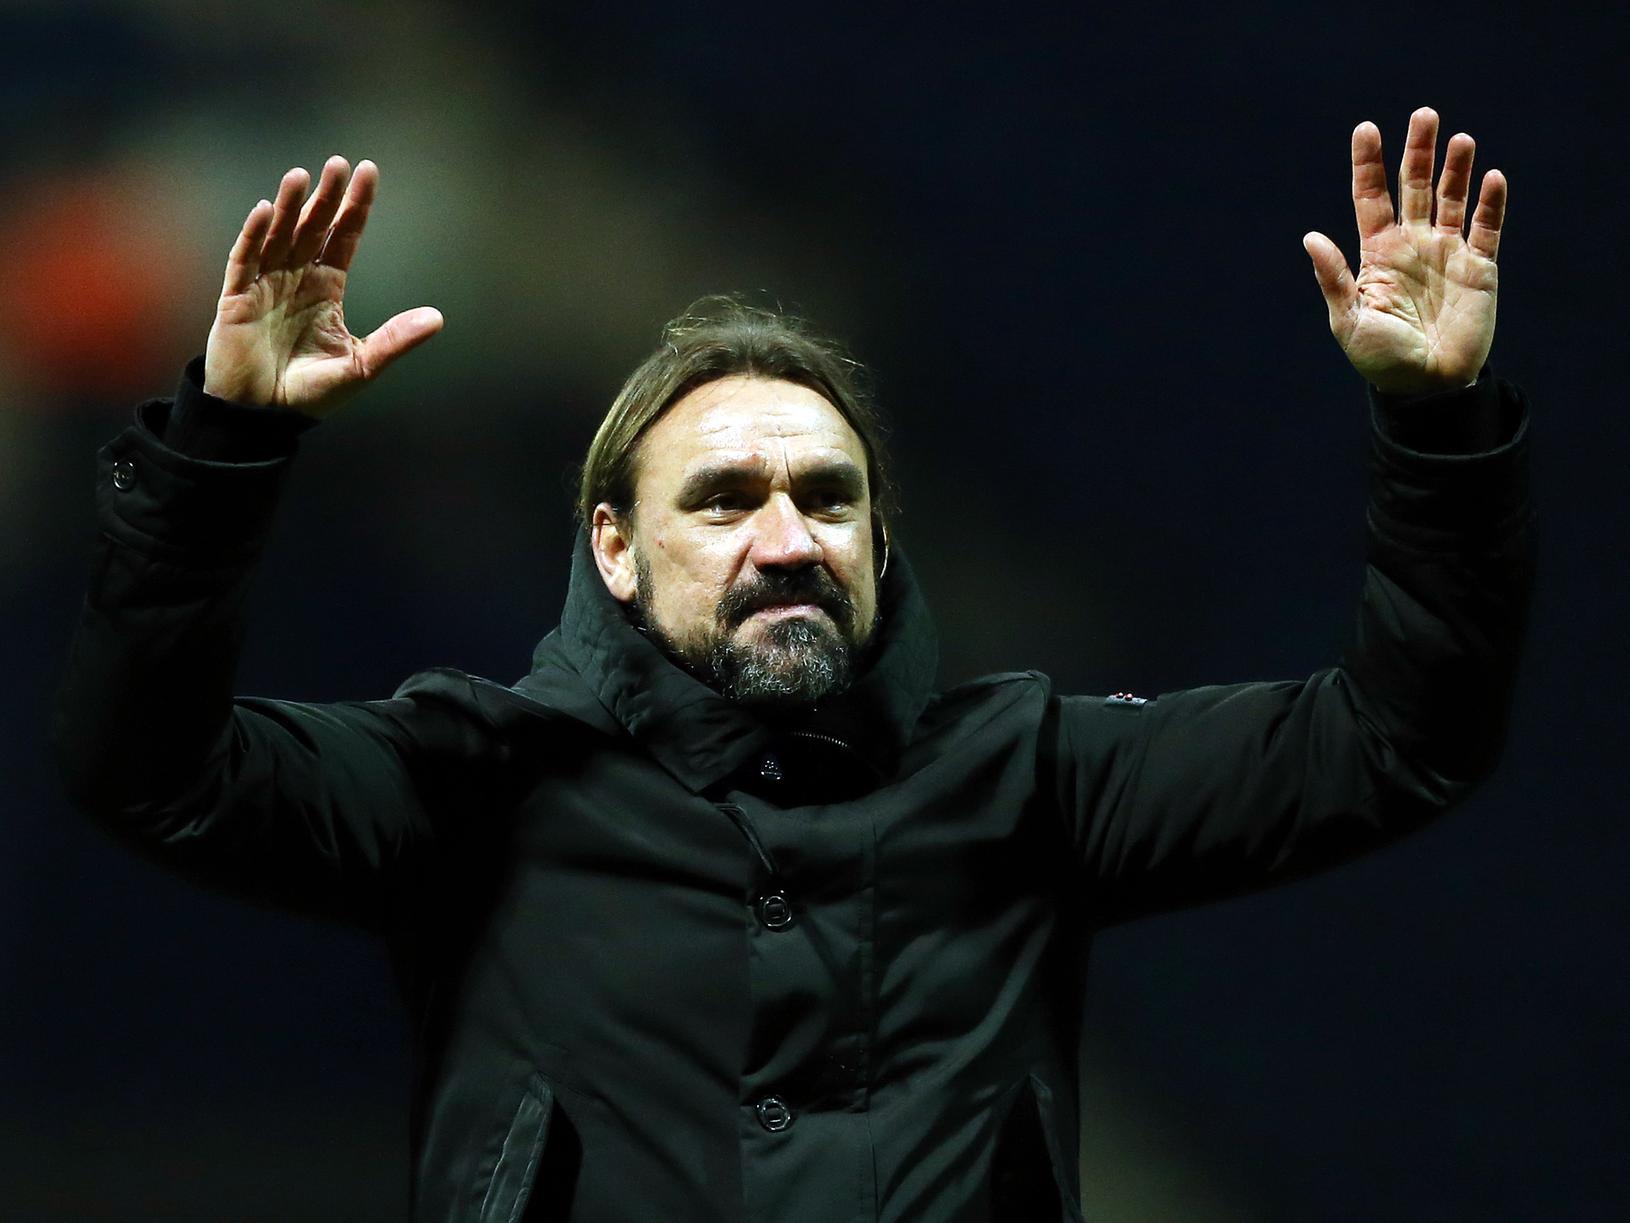 The Canaries are also in real danger of going down, but their boss Daniel Farke is talking tough ahead of the Wolves game. He's claimed that there's no chance his side are raising a white flag any time soon.